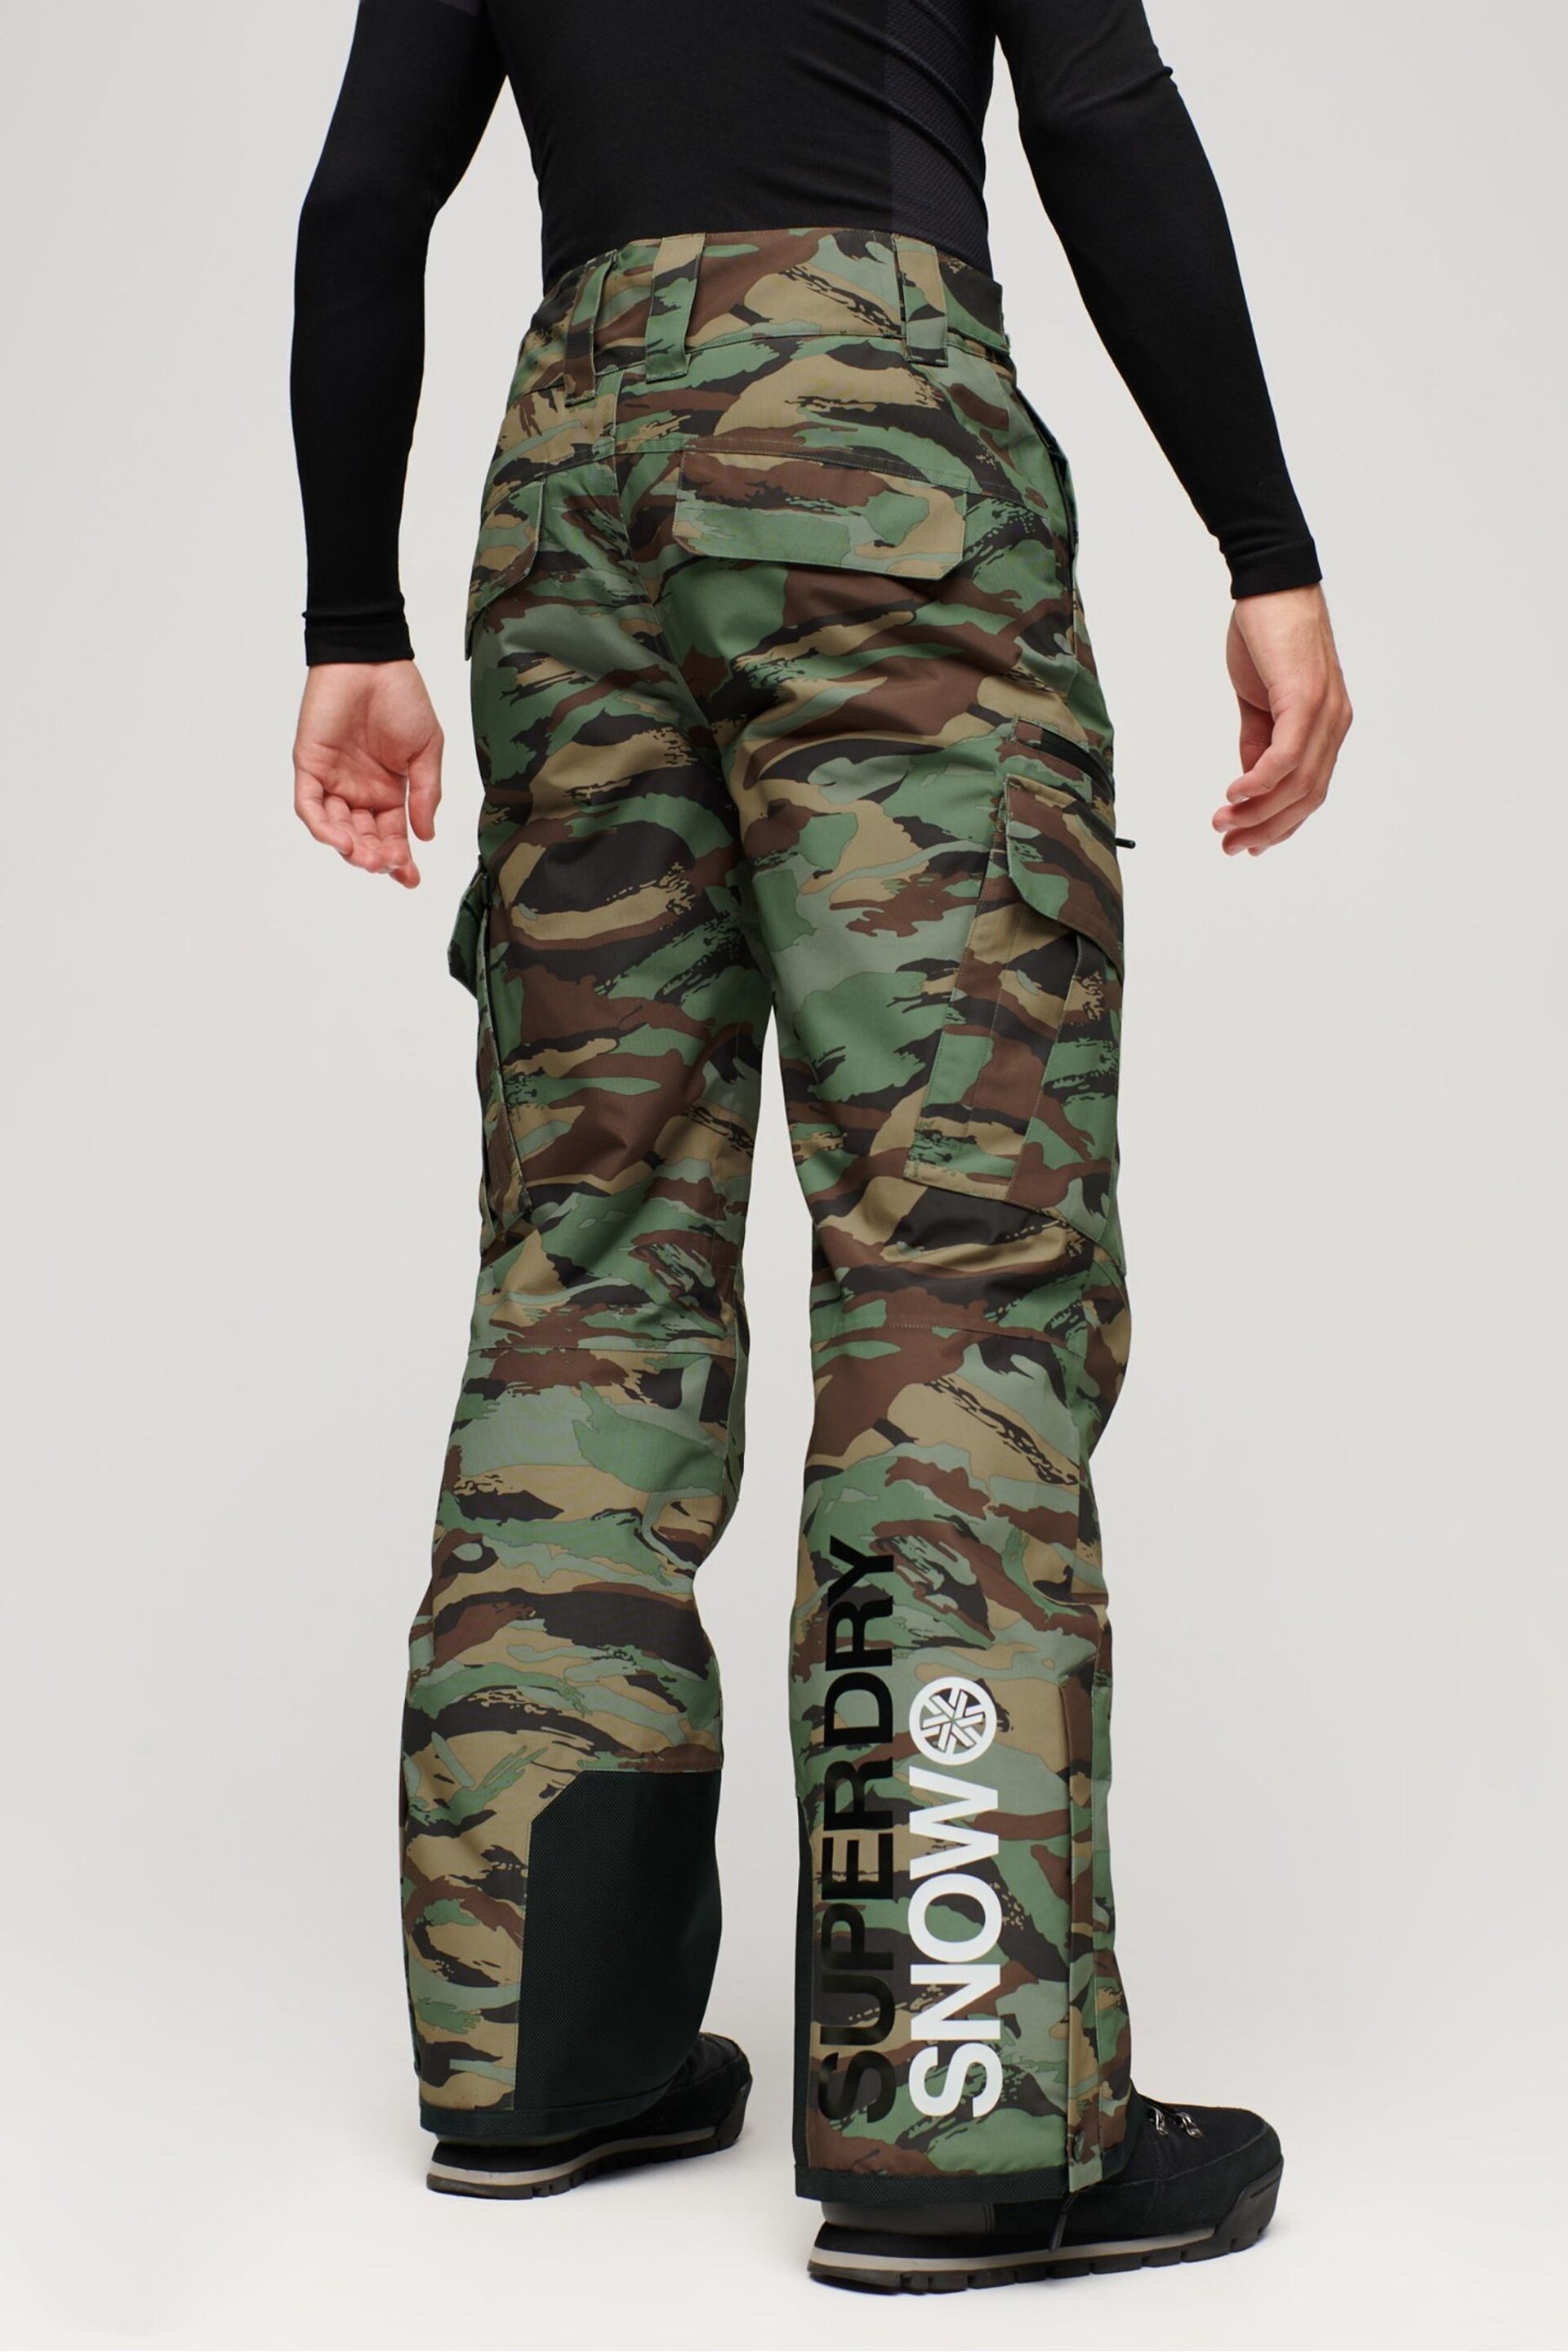 Superdry Green Ski Ultimate Rescue Trousers - Image 2 of 5